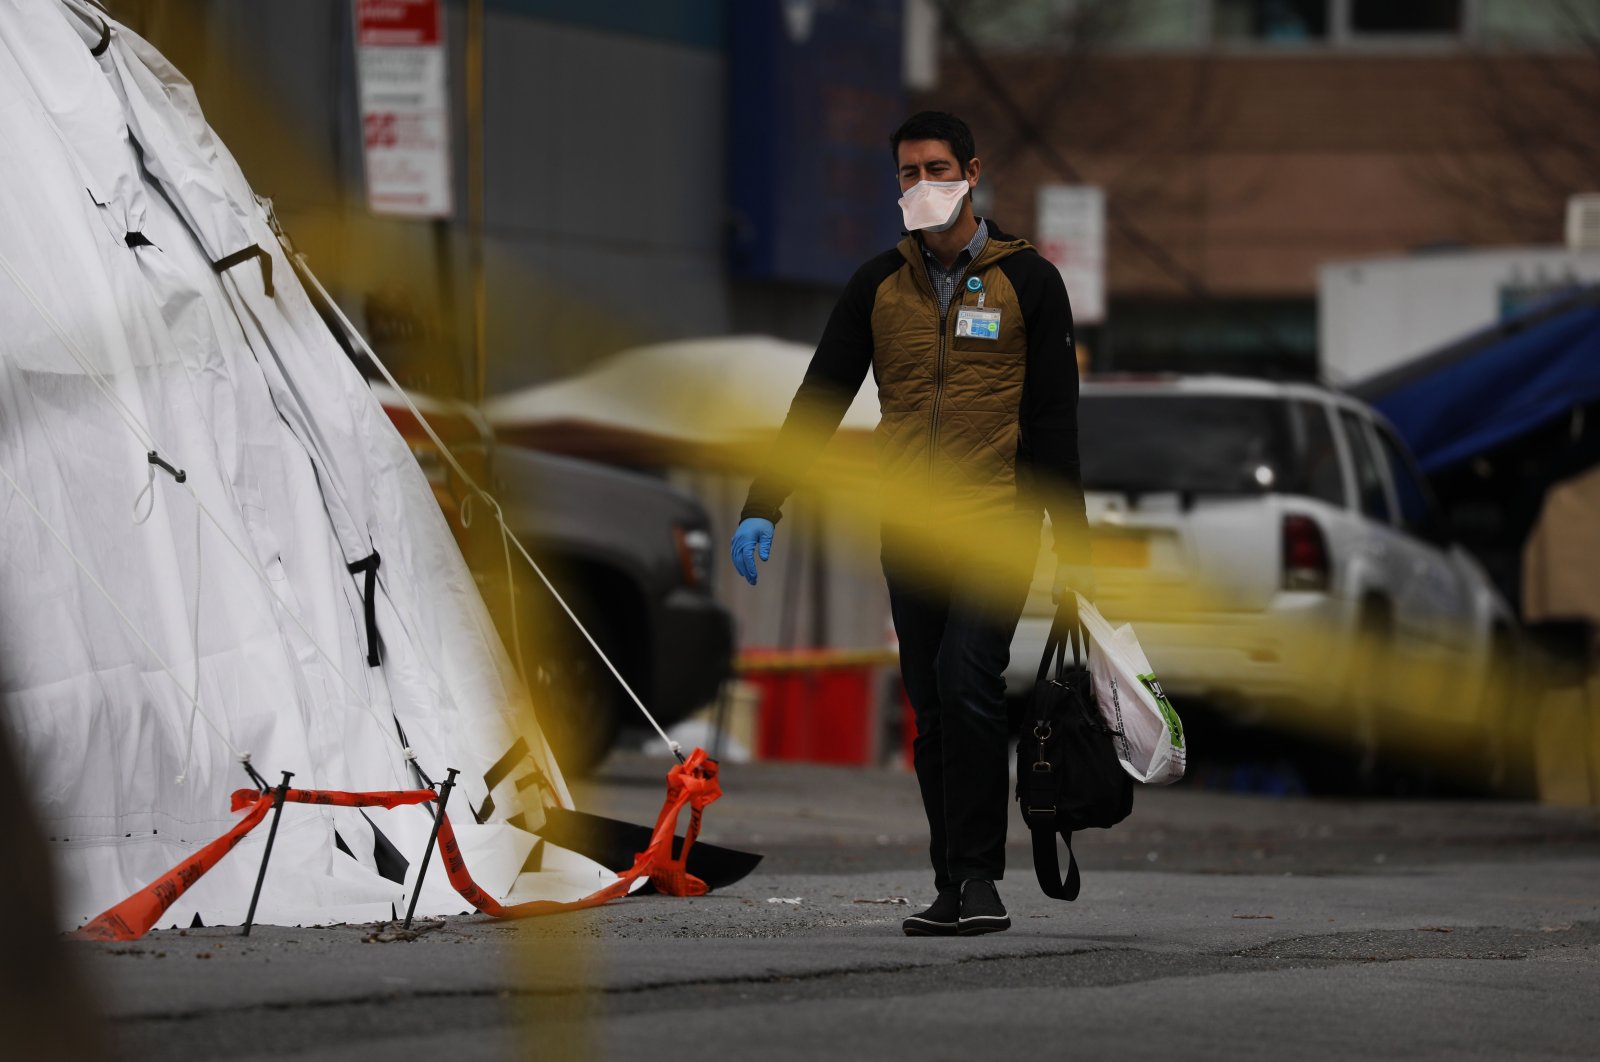 Medical workers walk outside of a coronavirus intake tent at the University Hospital of Brooklyn on April 14, 2020 in New York City, United States. (AFP Photo)